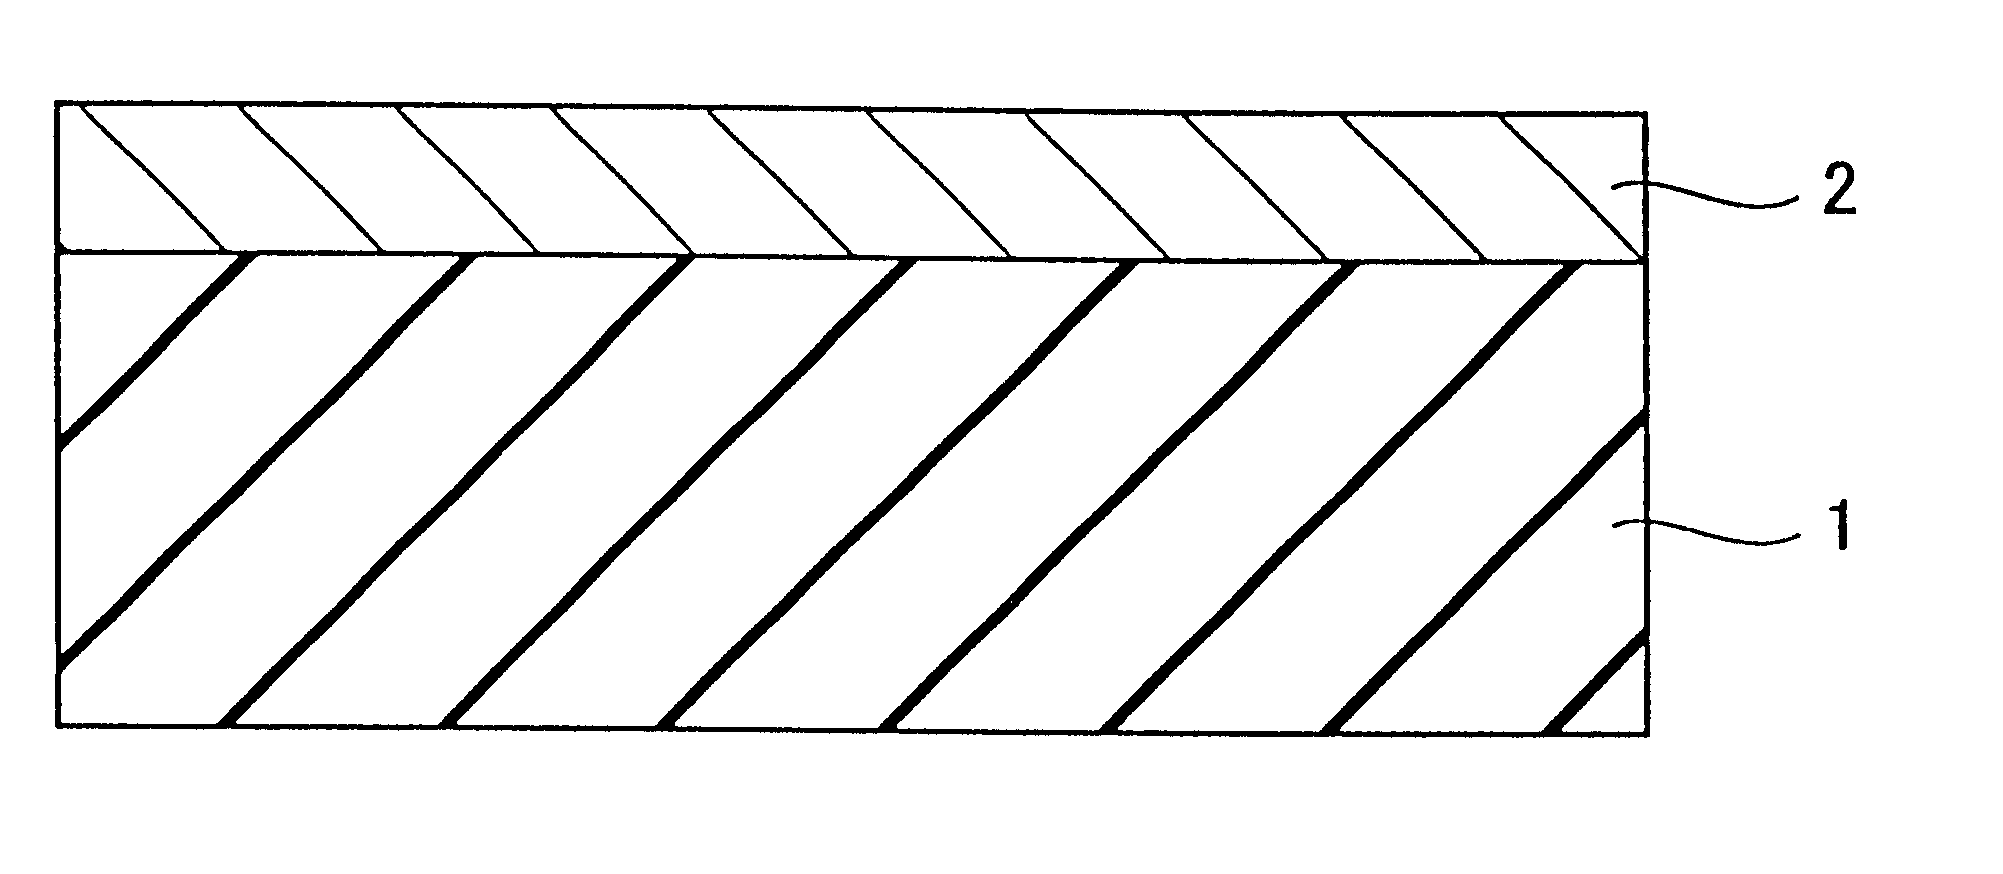 Hydrogen-permeable structure and method of manufacturing the same